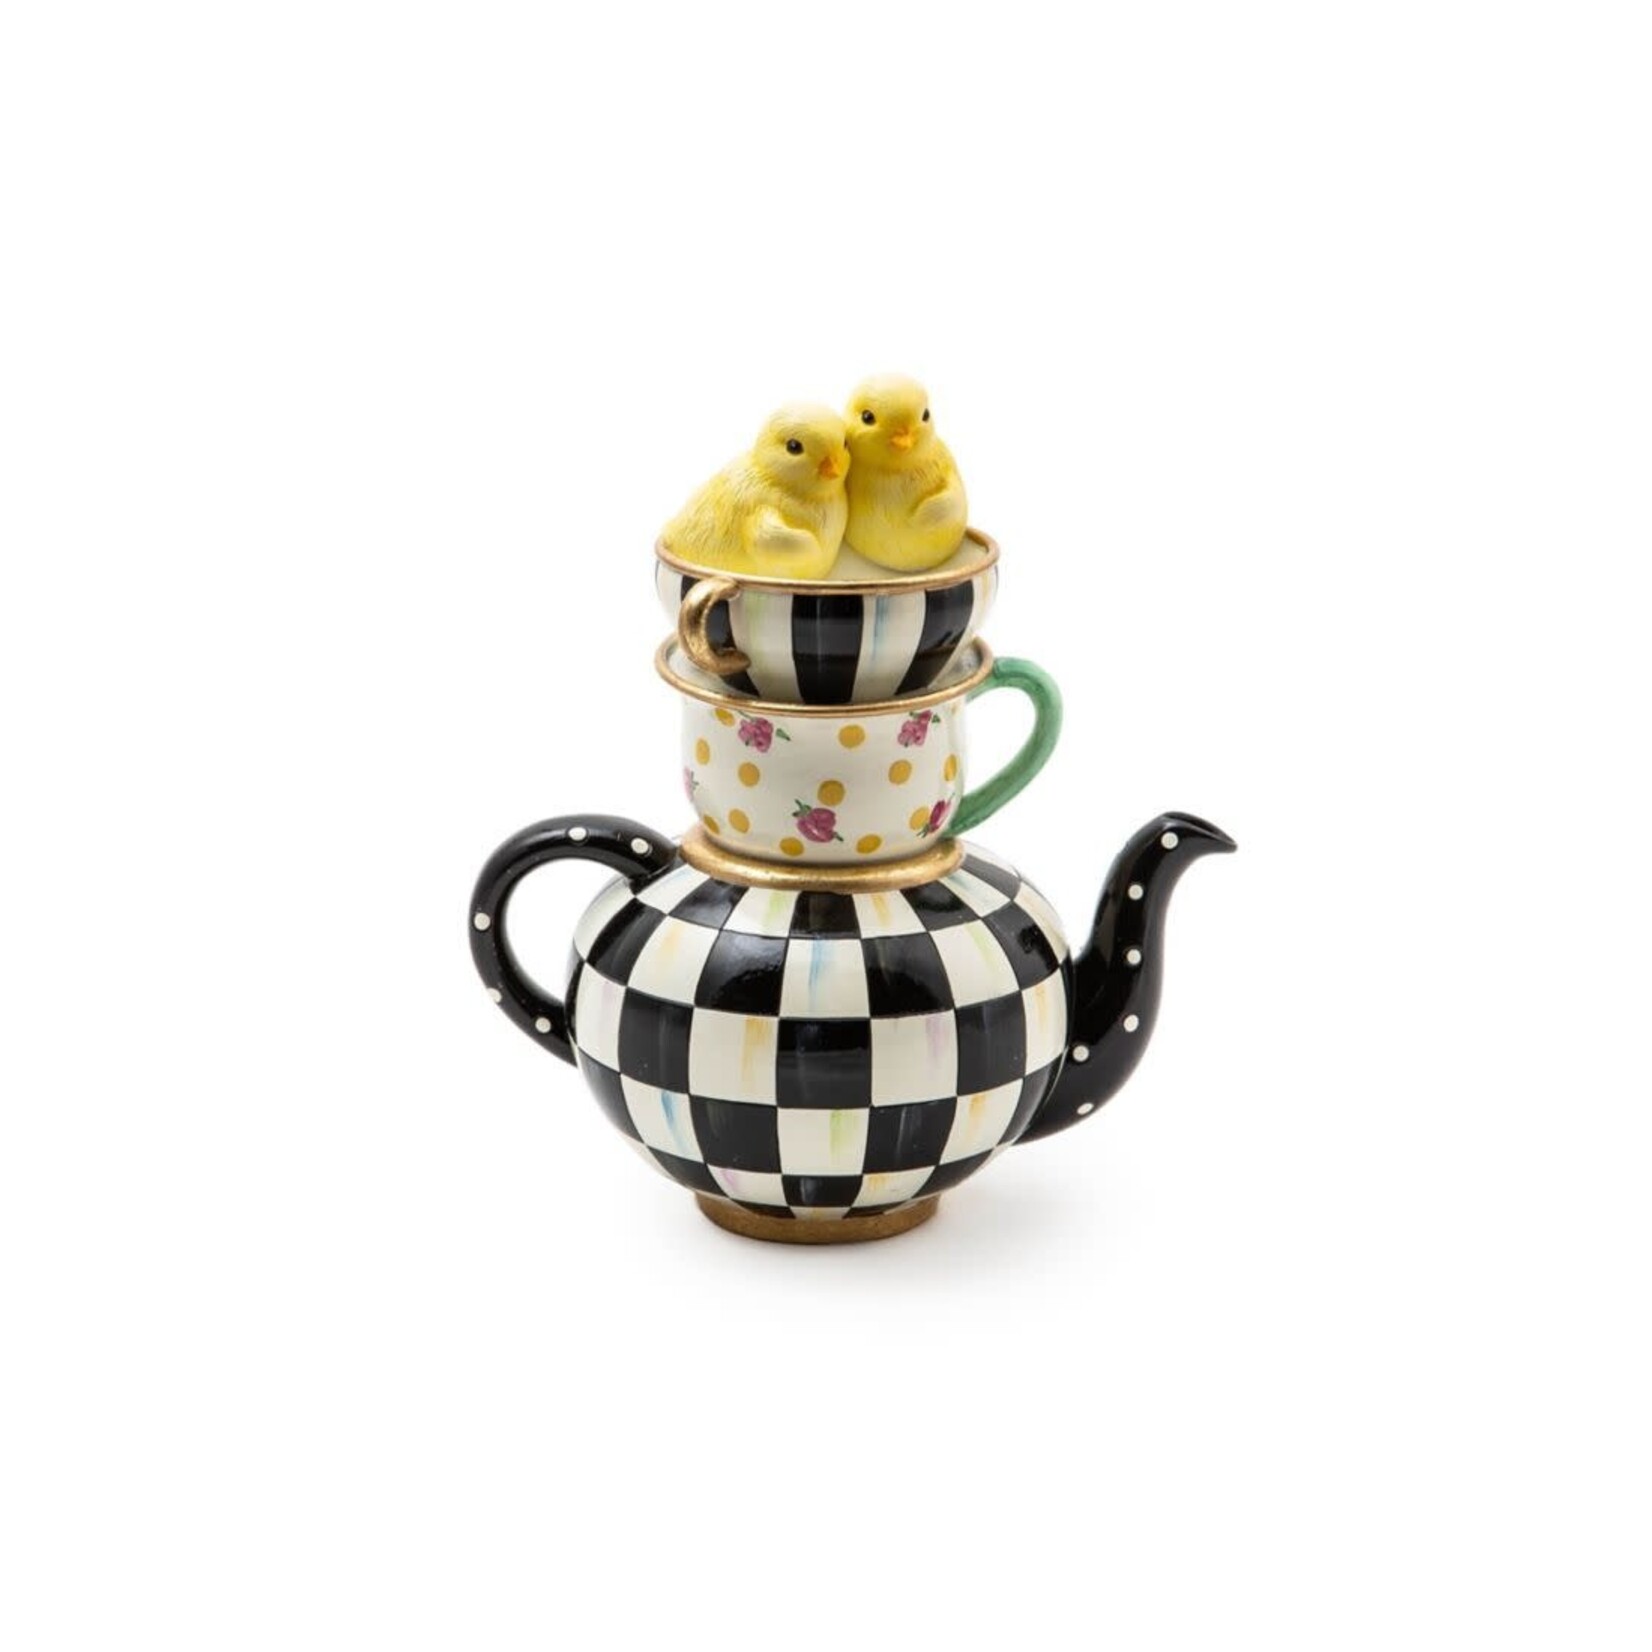 MacKenzie-Childs Courtly Chickatee Teapot